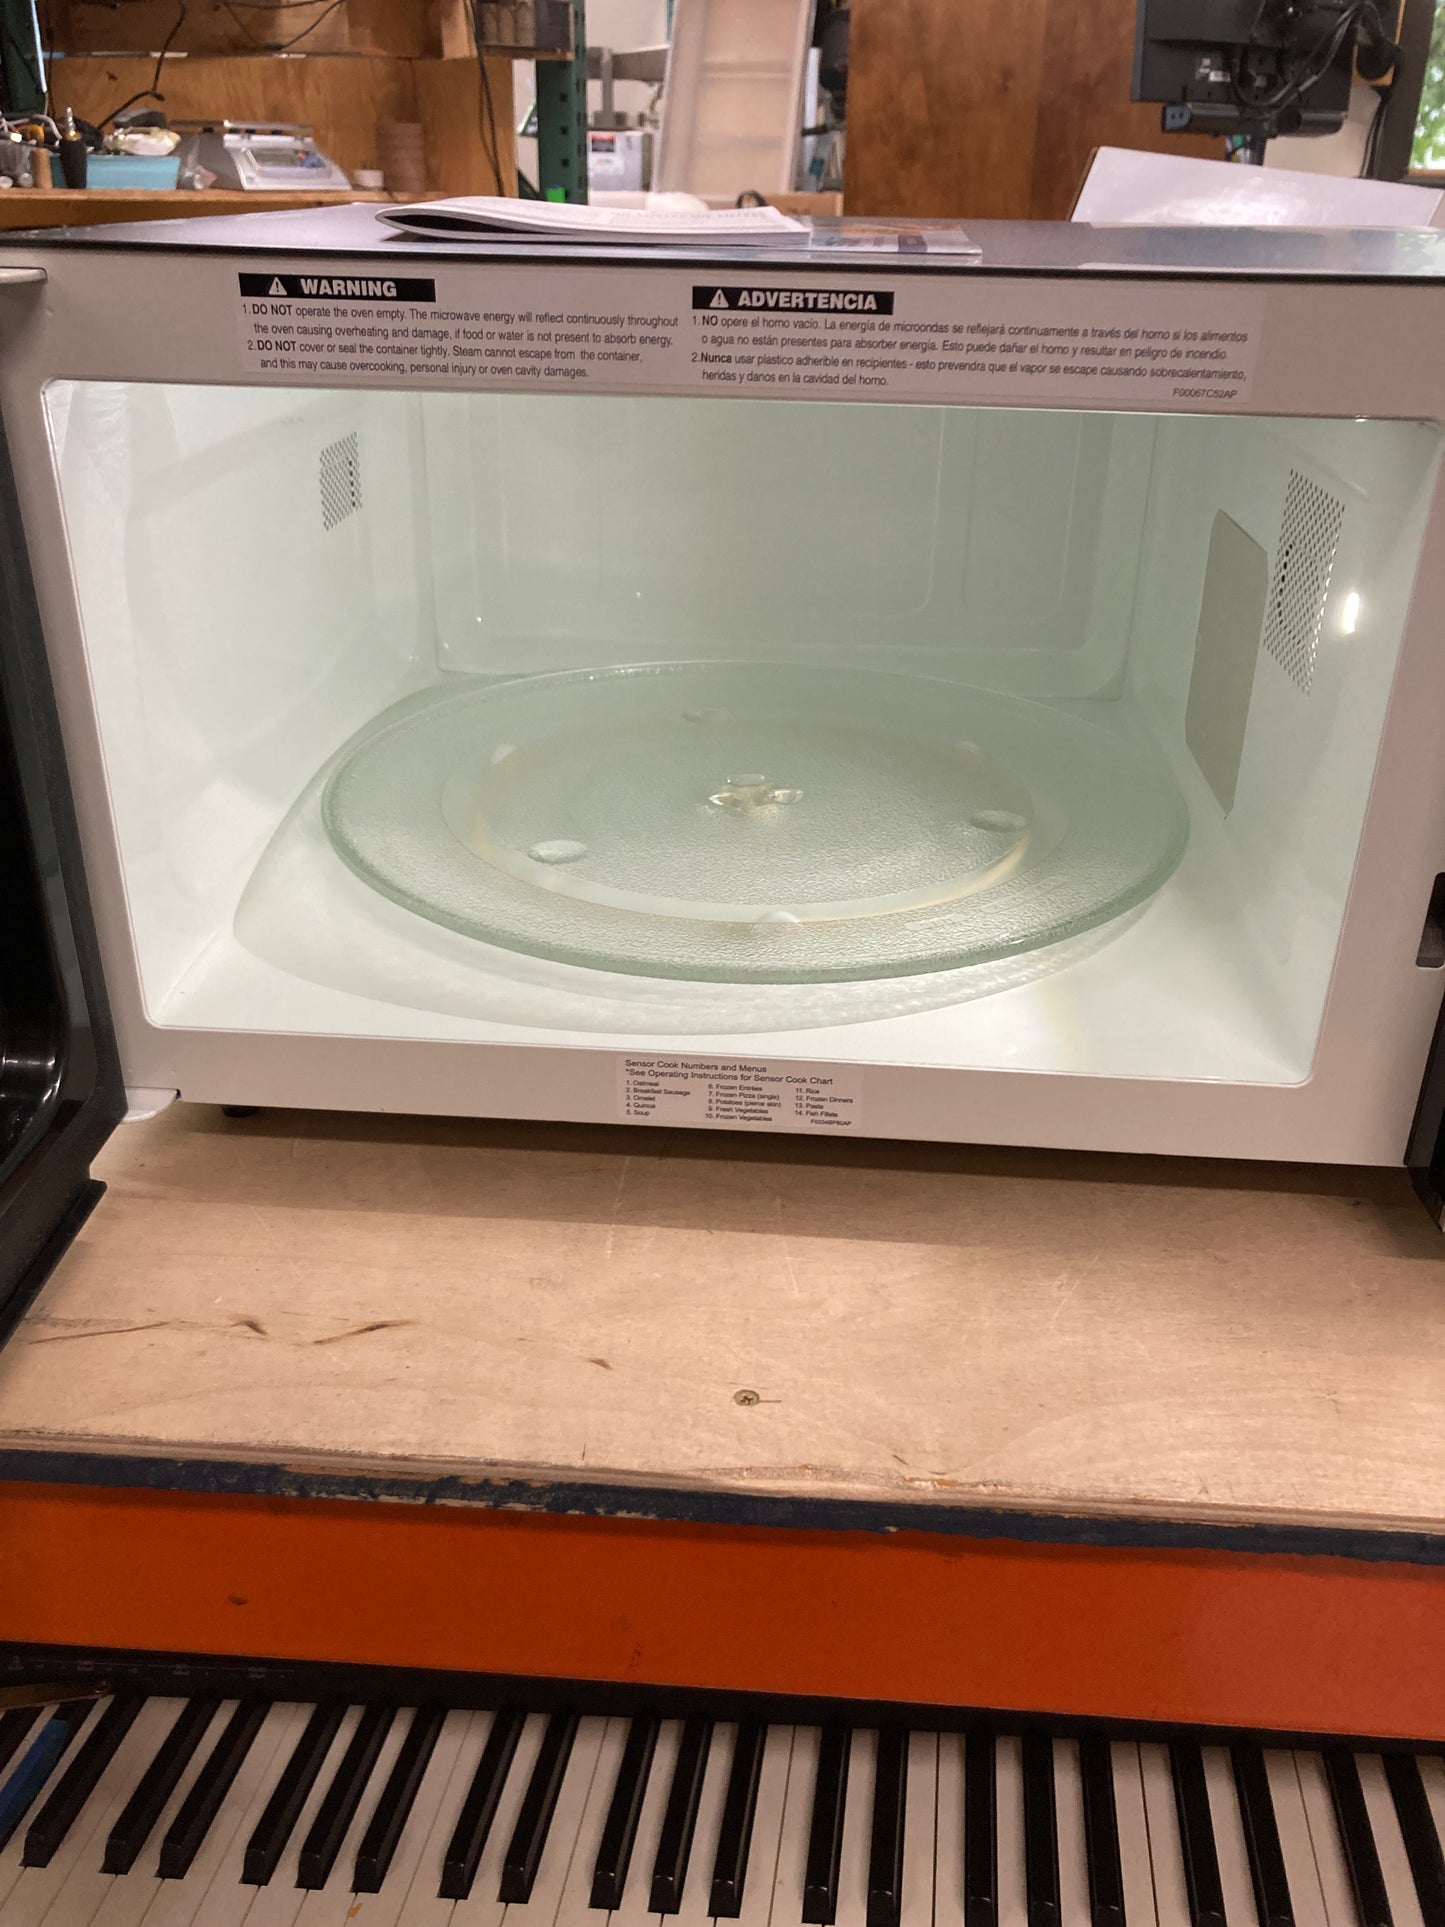 Panasonic 1.6CuFt Countertop Microwave with Genius Inverter Technology, NN-SN755S - Retail $179 Default Title